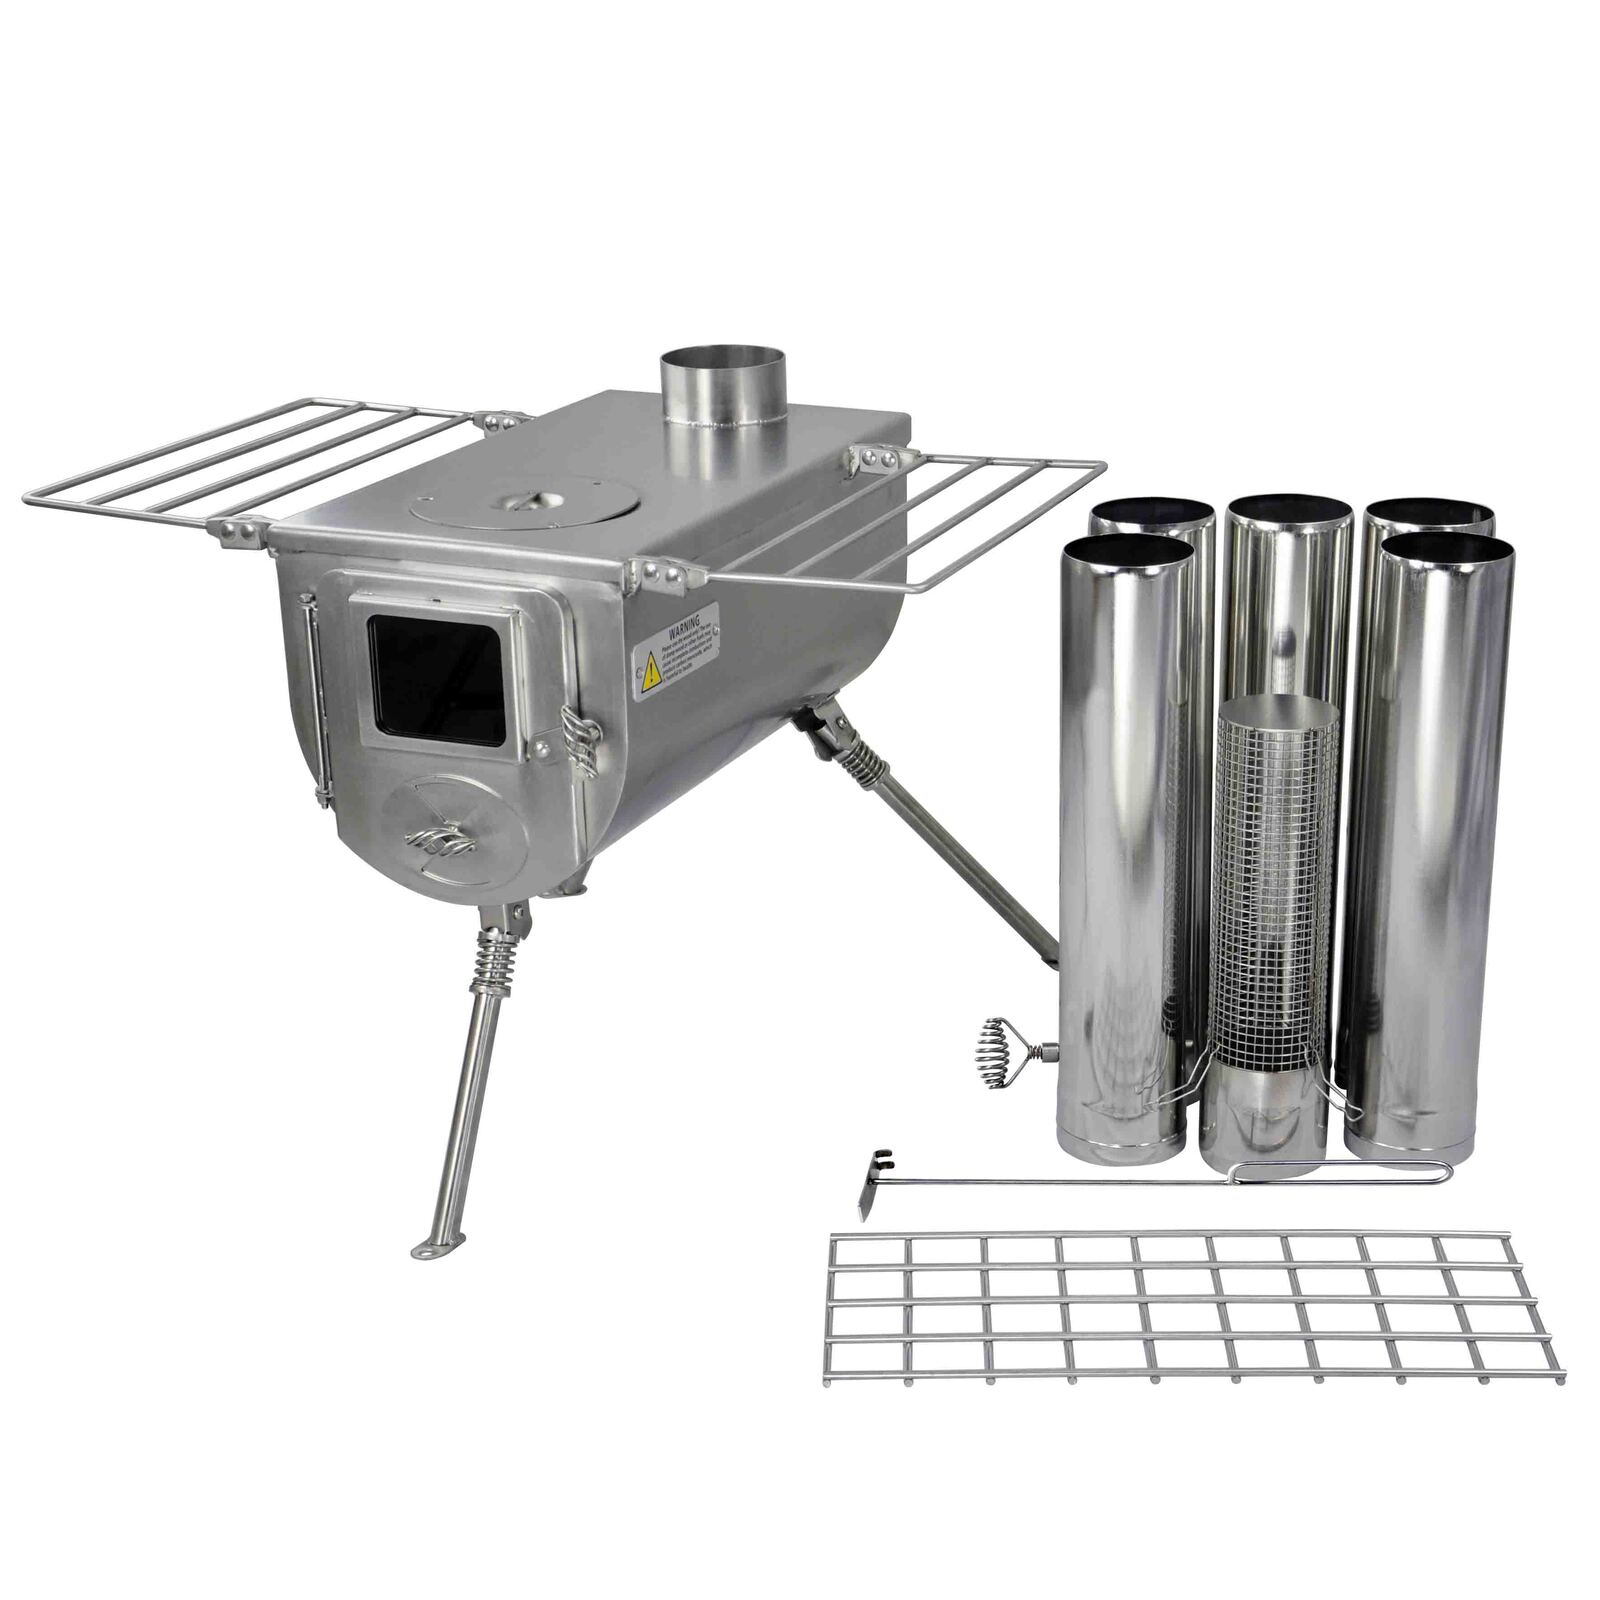 Winnerwell Woodlander Double-View Stove Small